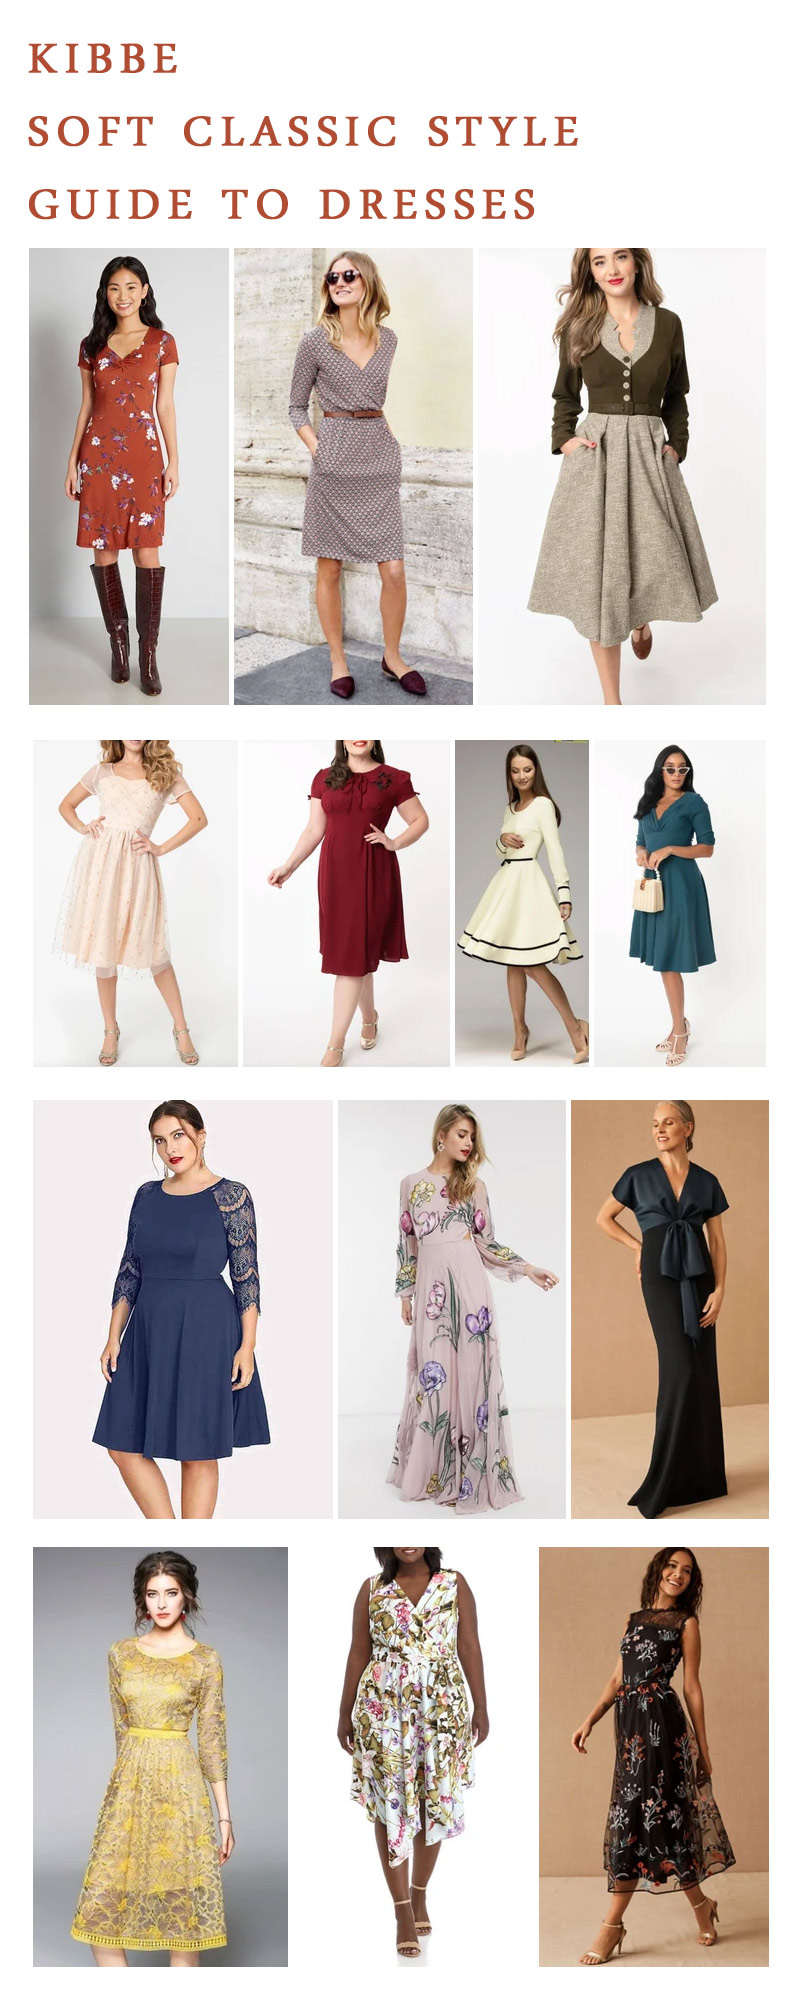 Kibbe Soft Classic Style Guide to Dresses